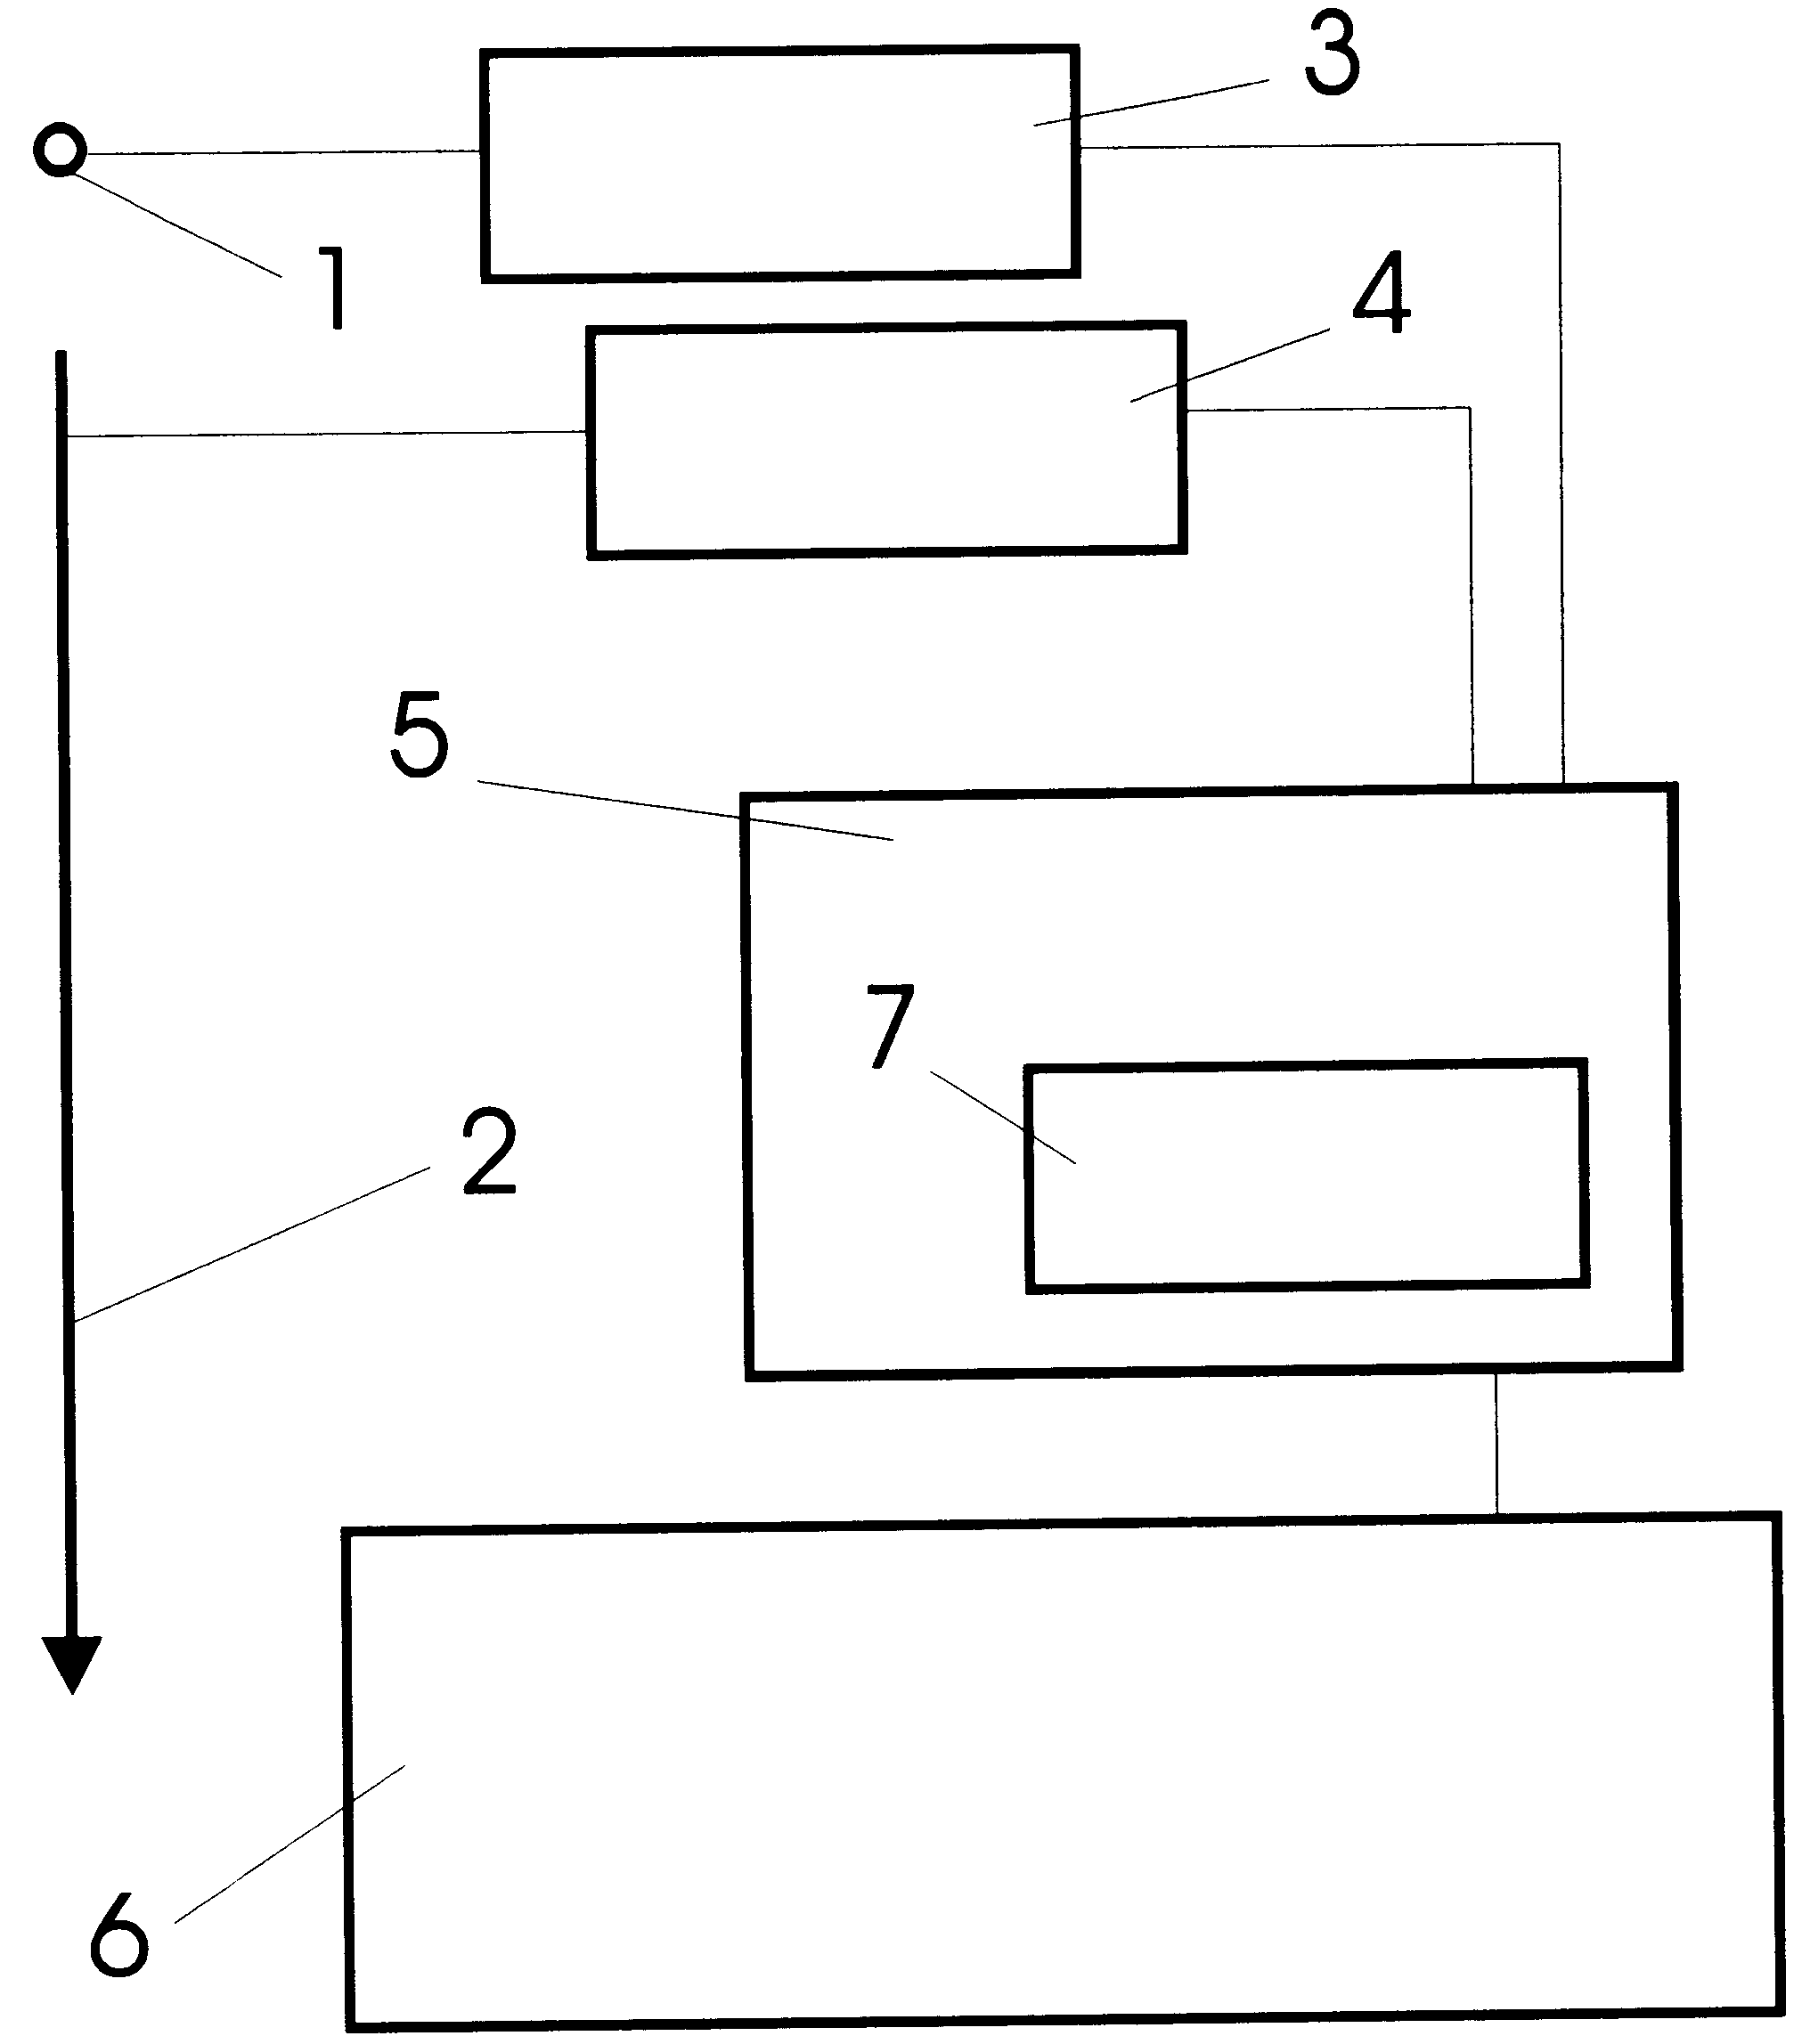 Apparatus and methods for presentation of information relating to objects being addressed